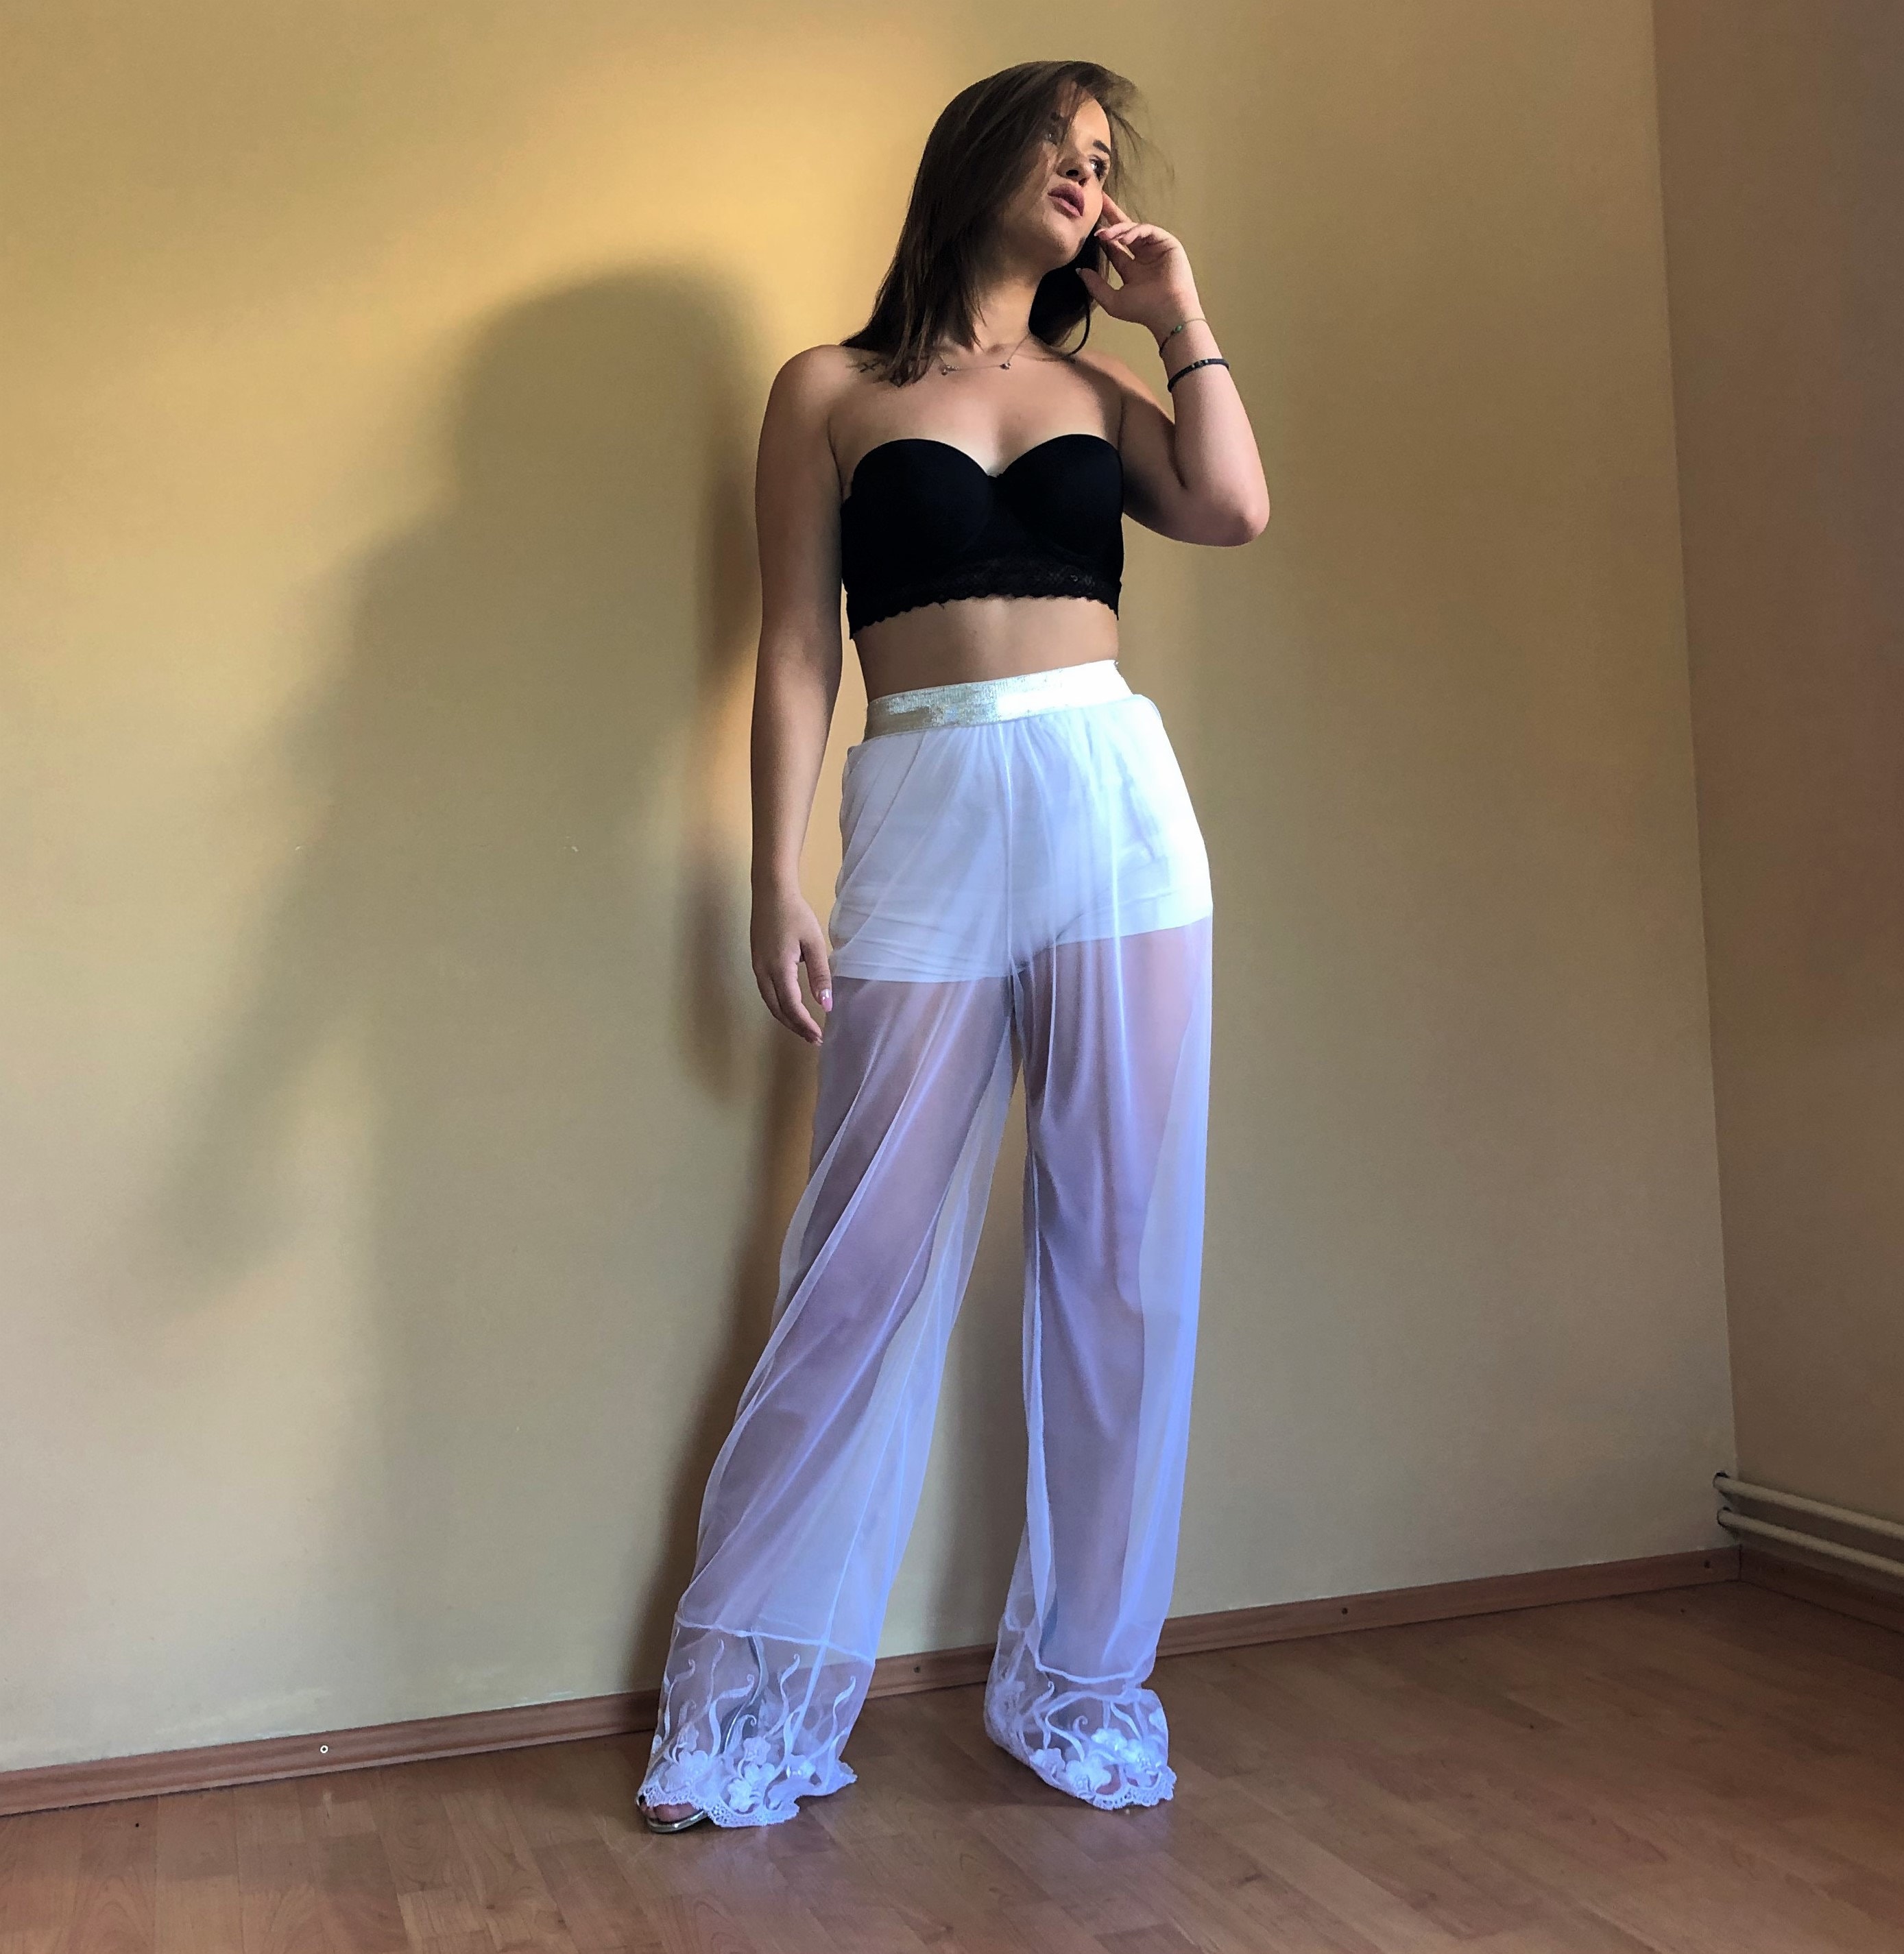 Flared mesh pants and top for dance, Sexy outfit with transparent